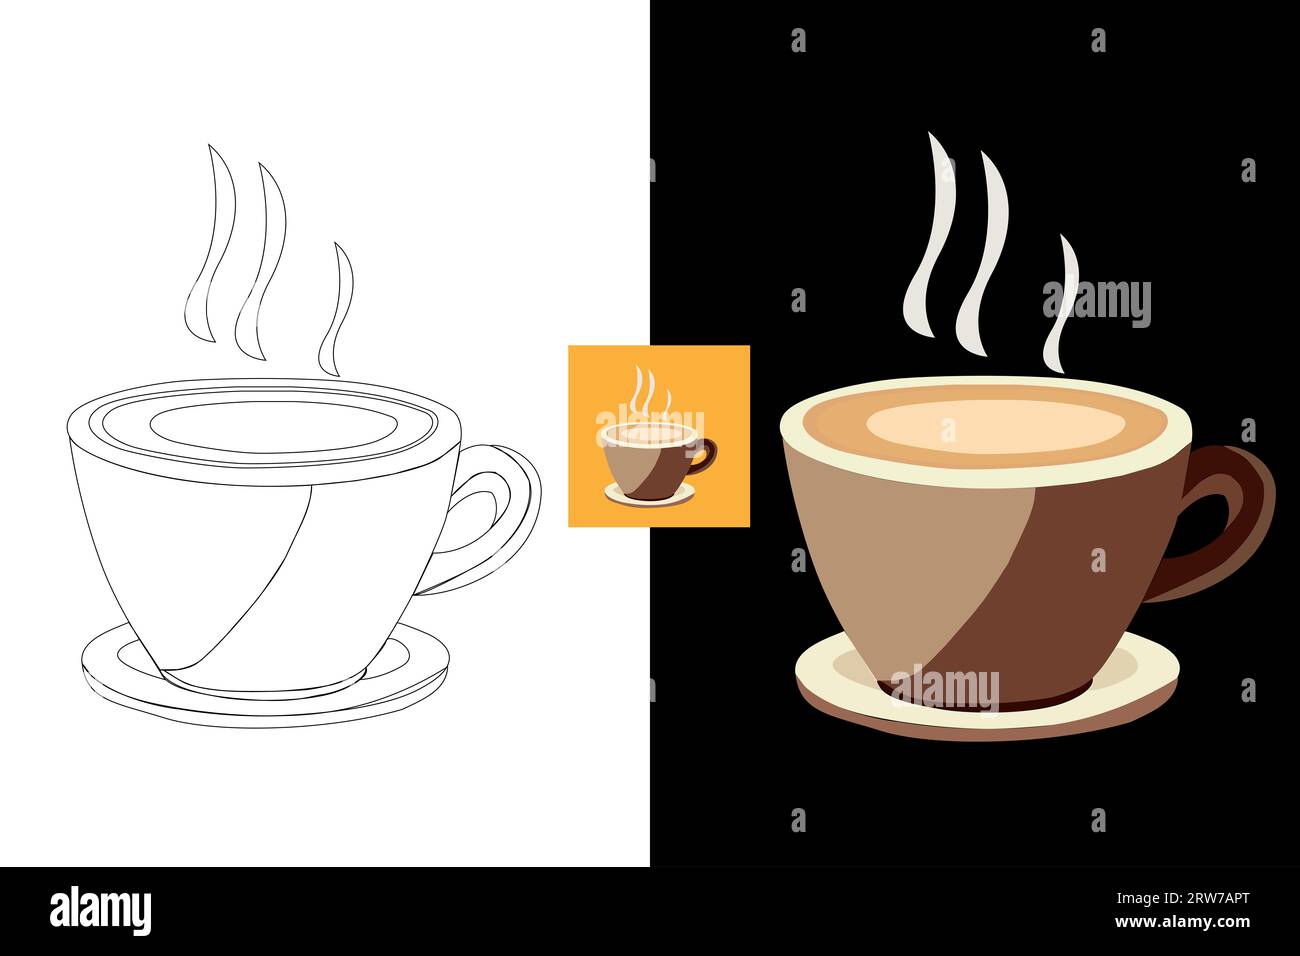 Icon depicting a set of coffee cups Drawn in a vector format Stock Photo